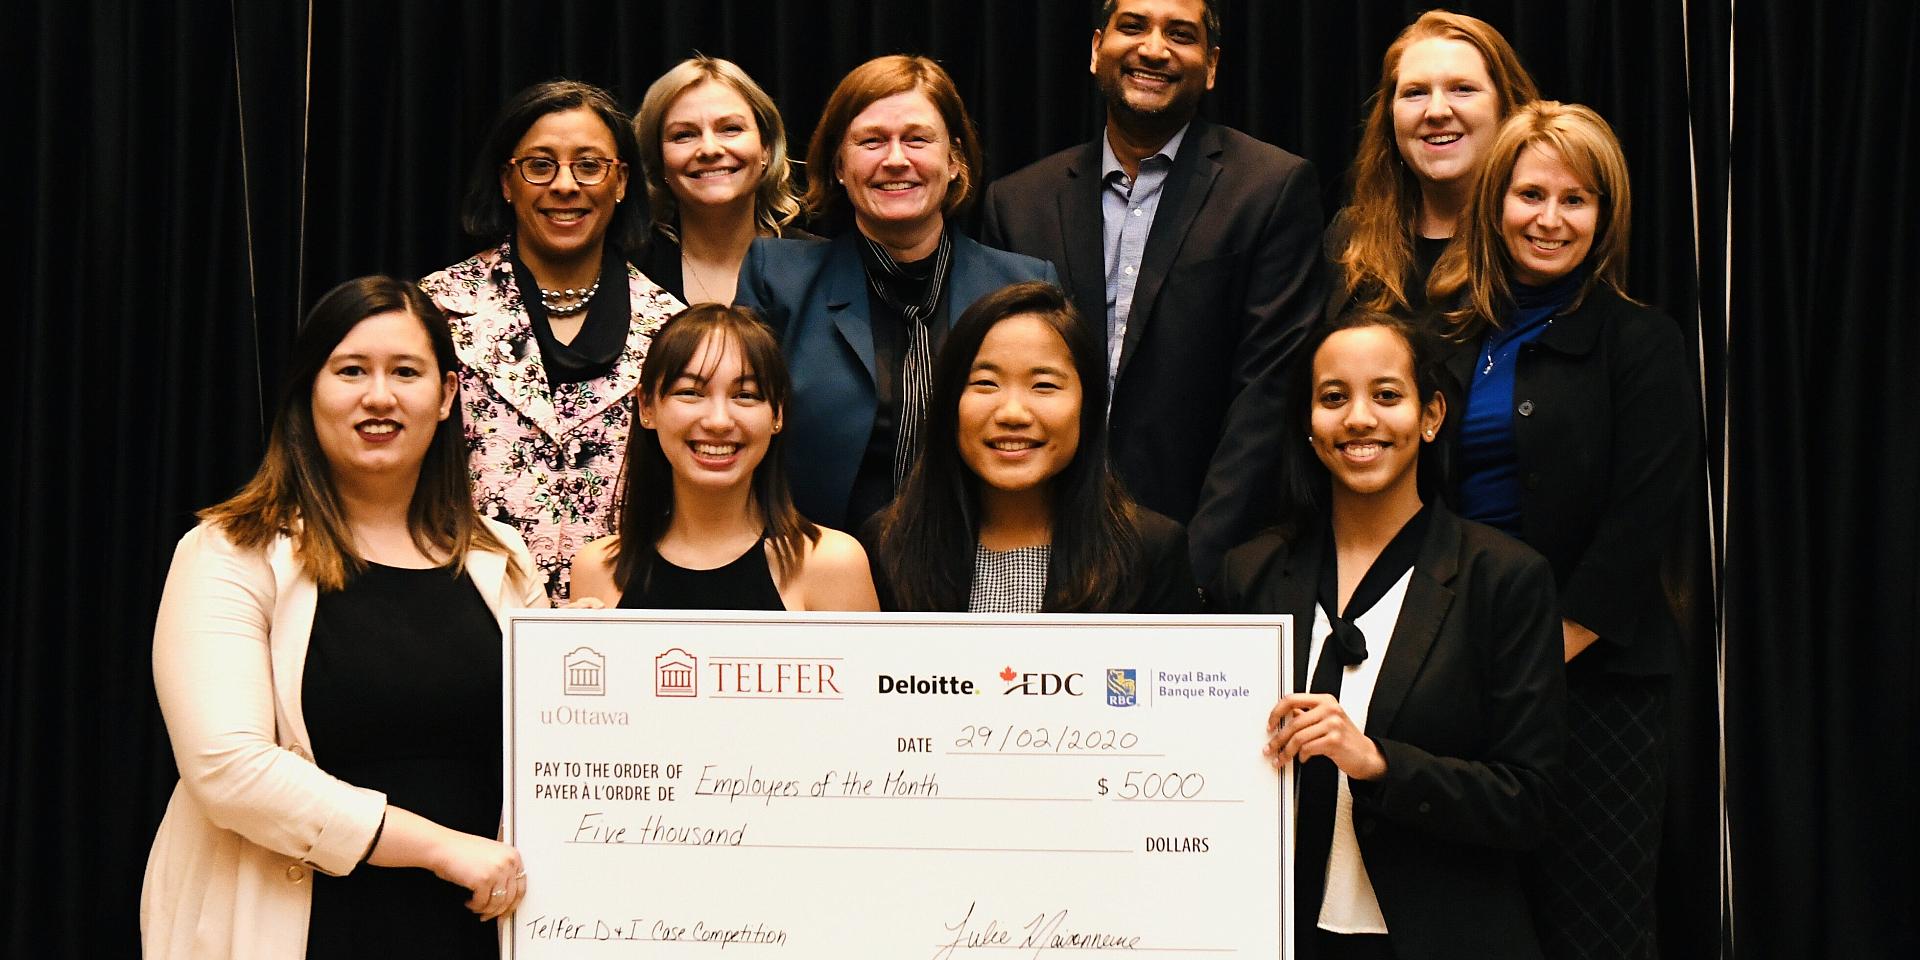 4 young happy women holding a big mock cheque surrounded by older smiling peoplein front of a black urtain